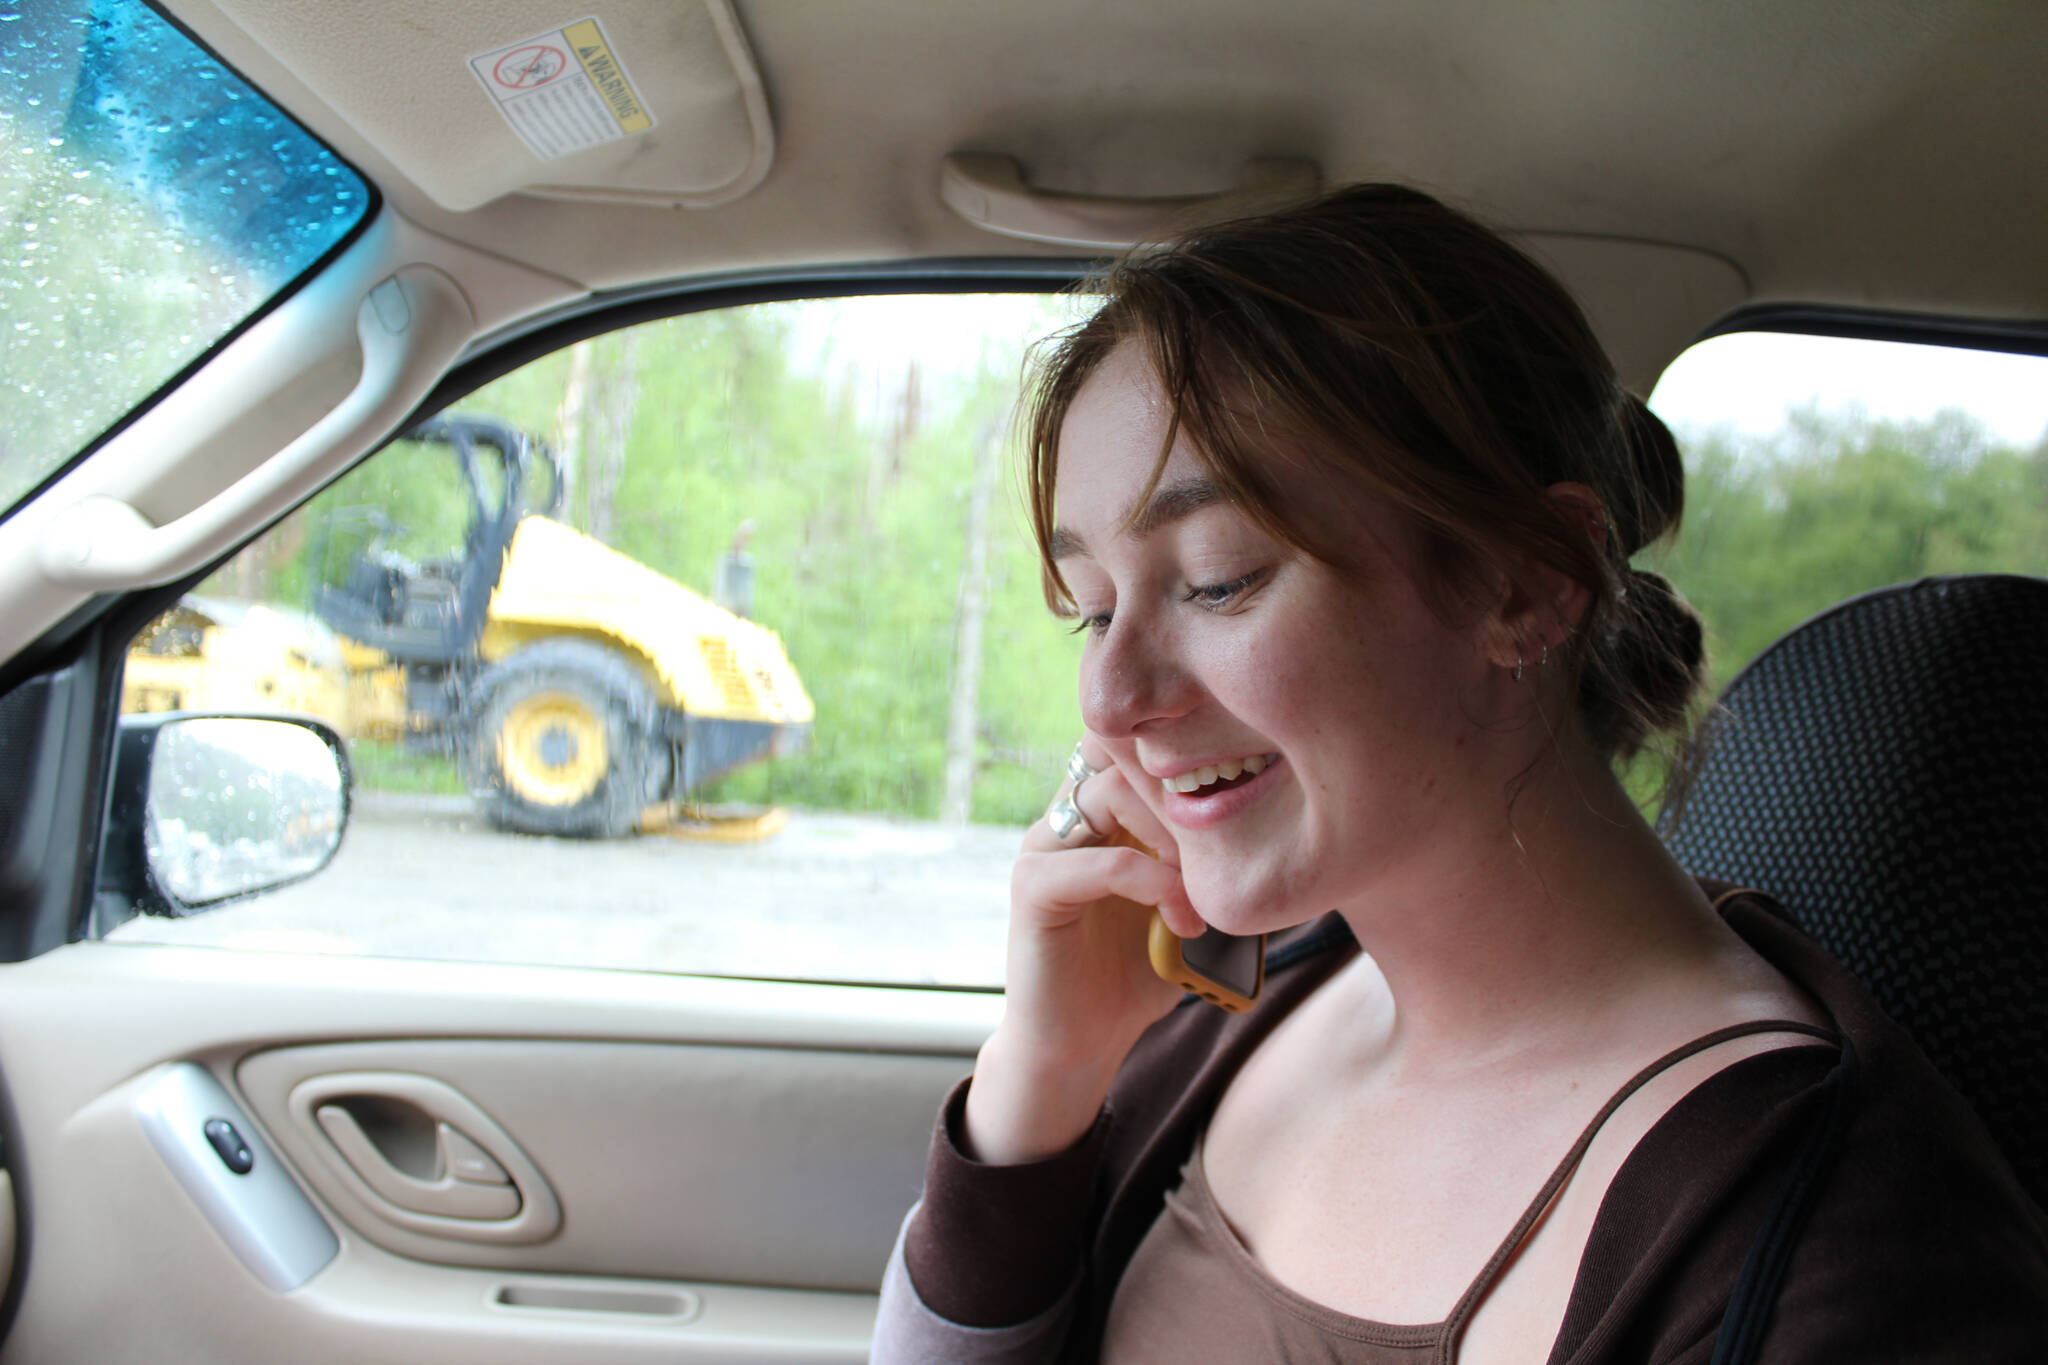 Anna waits in traffic in Cooper Landing, Alaska, on June 9, 2022. (Camille Botello/Peninsula Clarion)